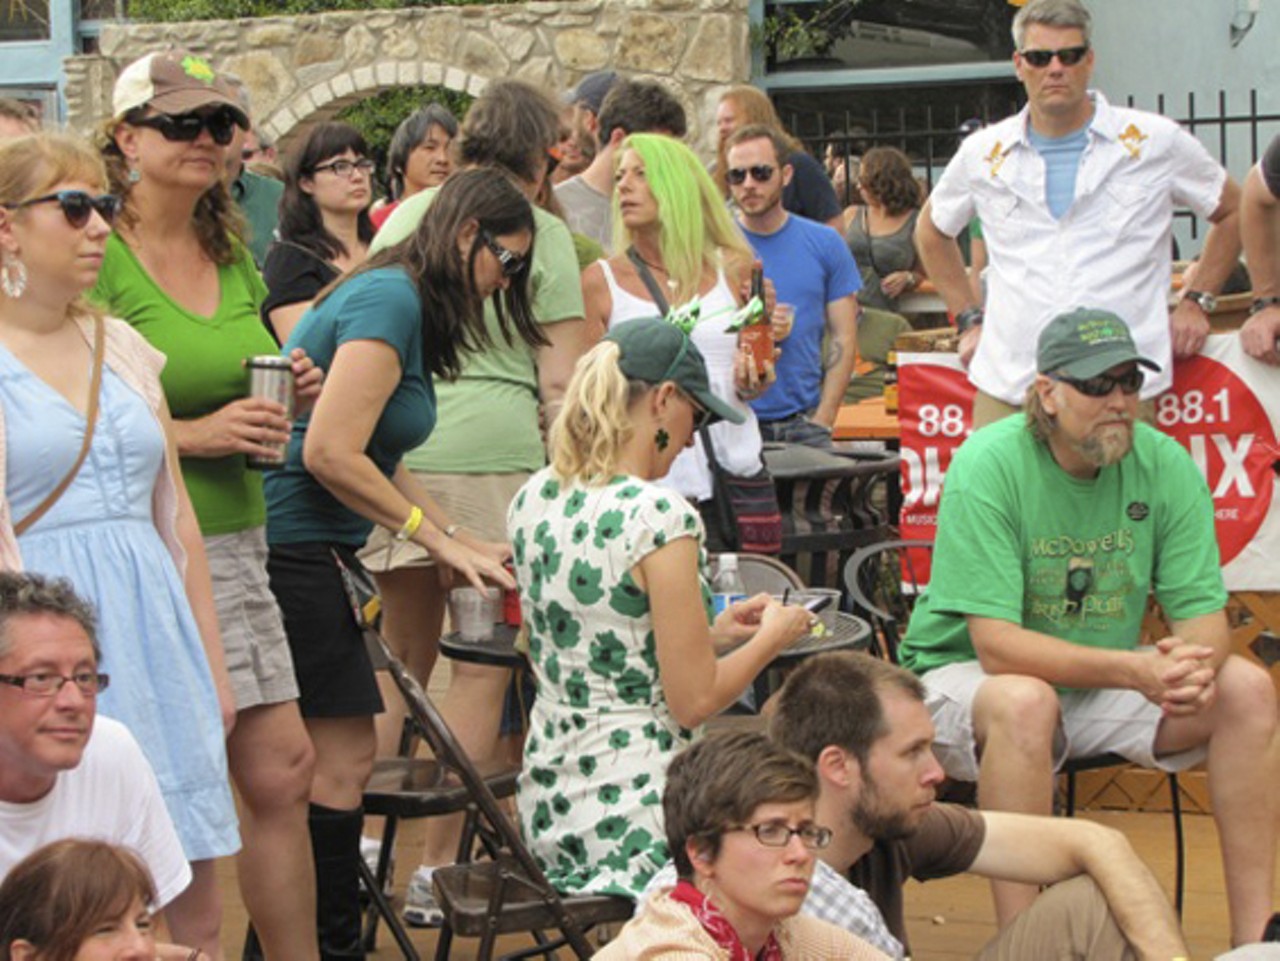 Twangfest was held on St. Patrick's Day, so many party goers donned green.